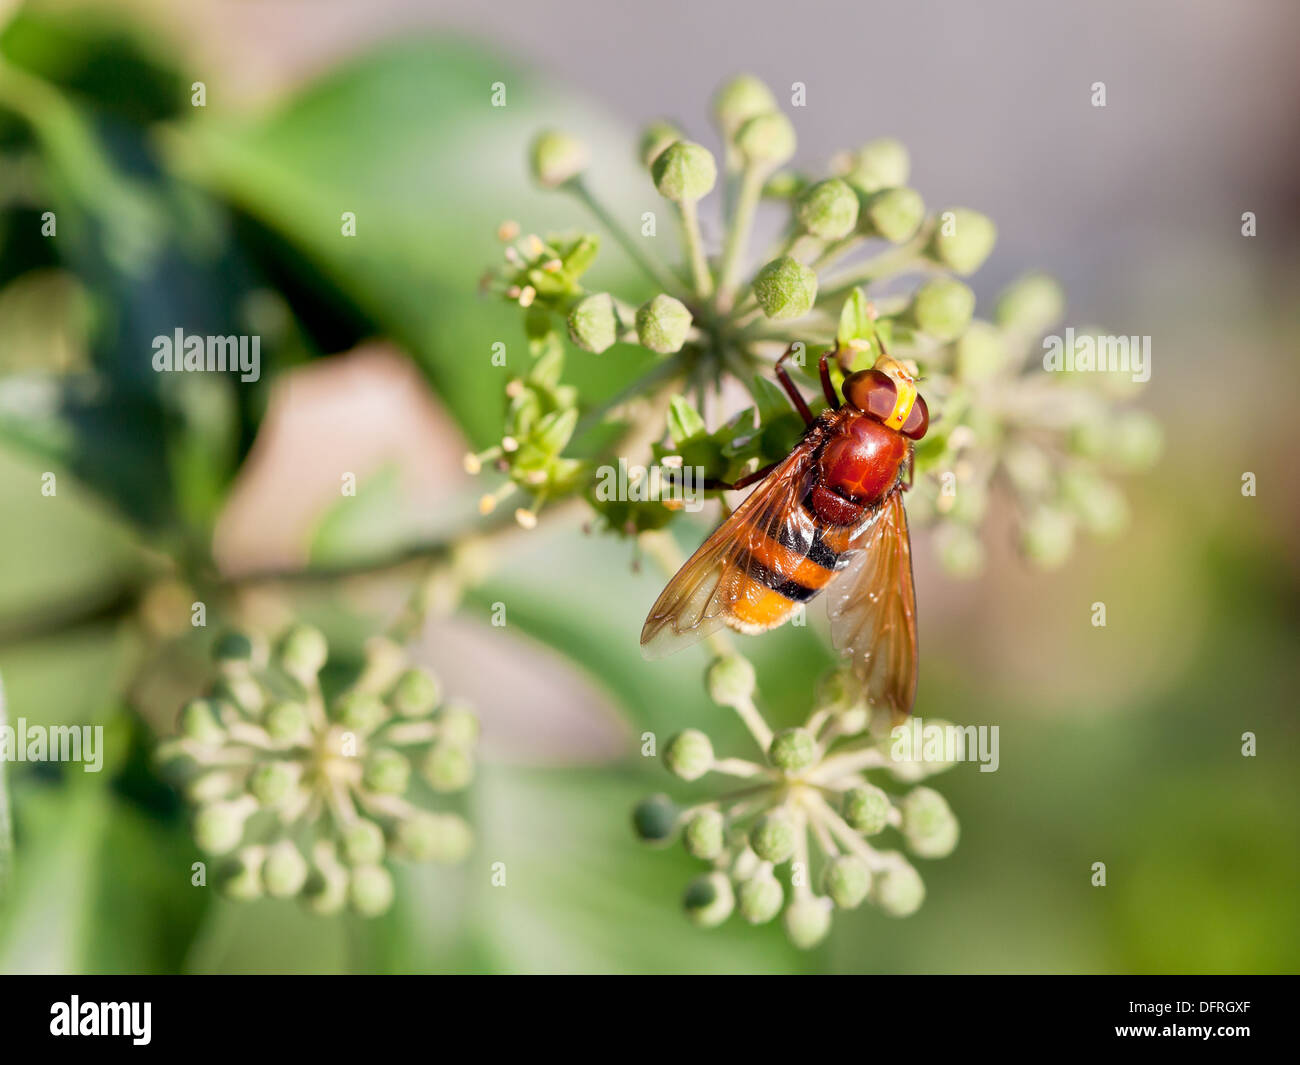 flower fly volucella inanis nectaring on green blossoms of ivy plant in autumn day Stock Photo